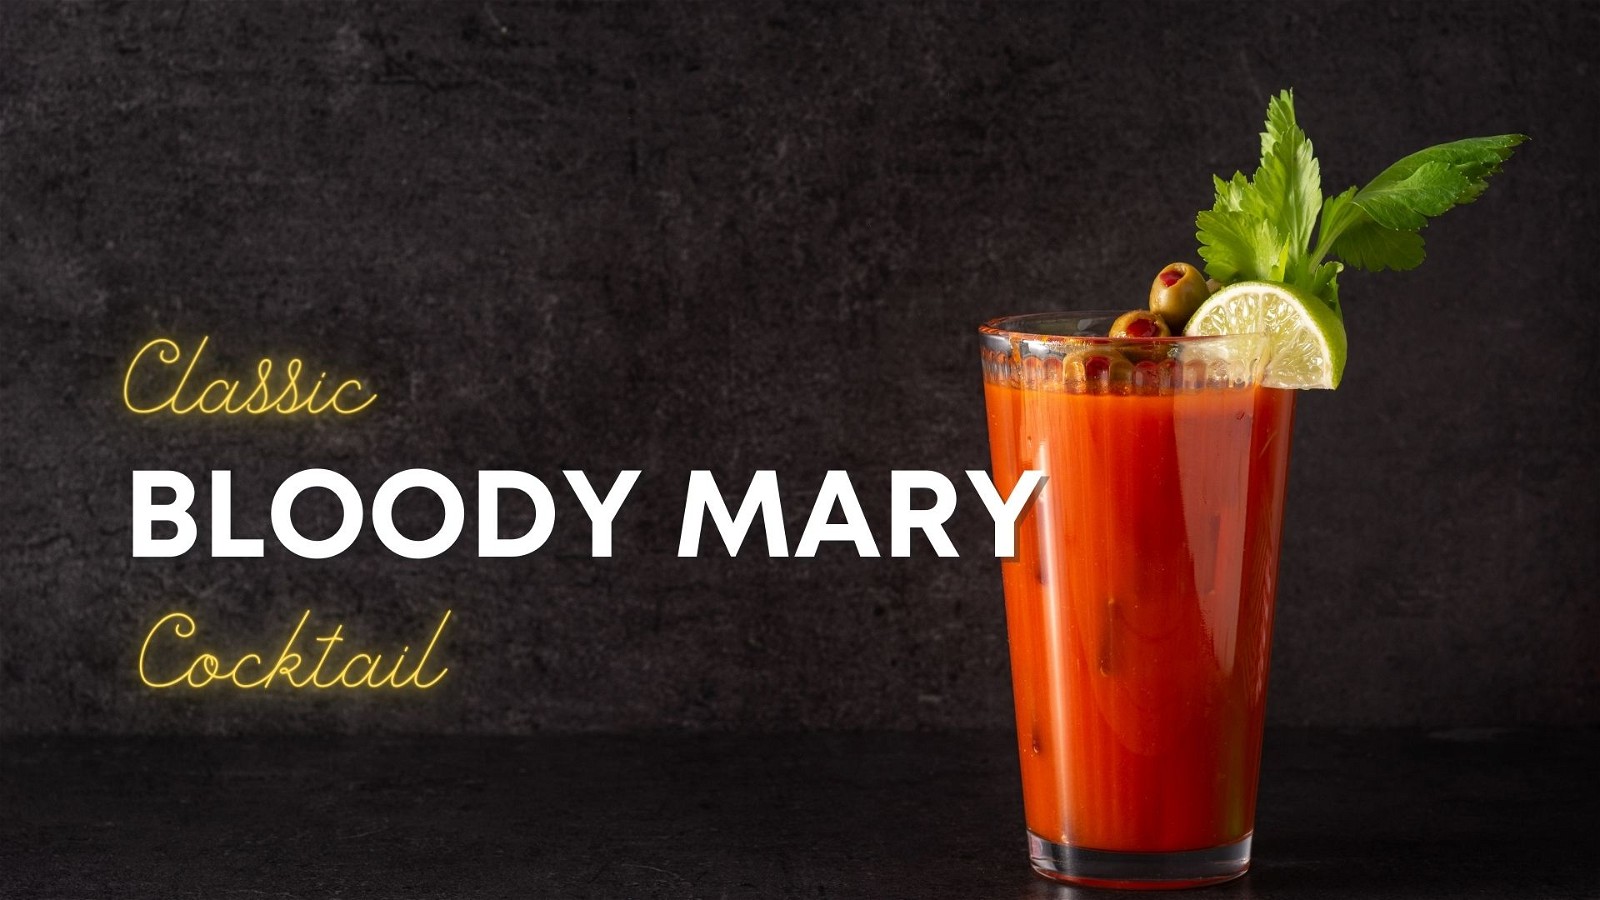 Image of Classic Bloody Mary